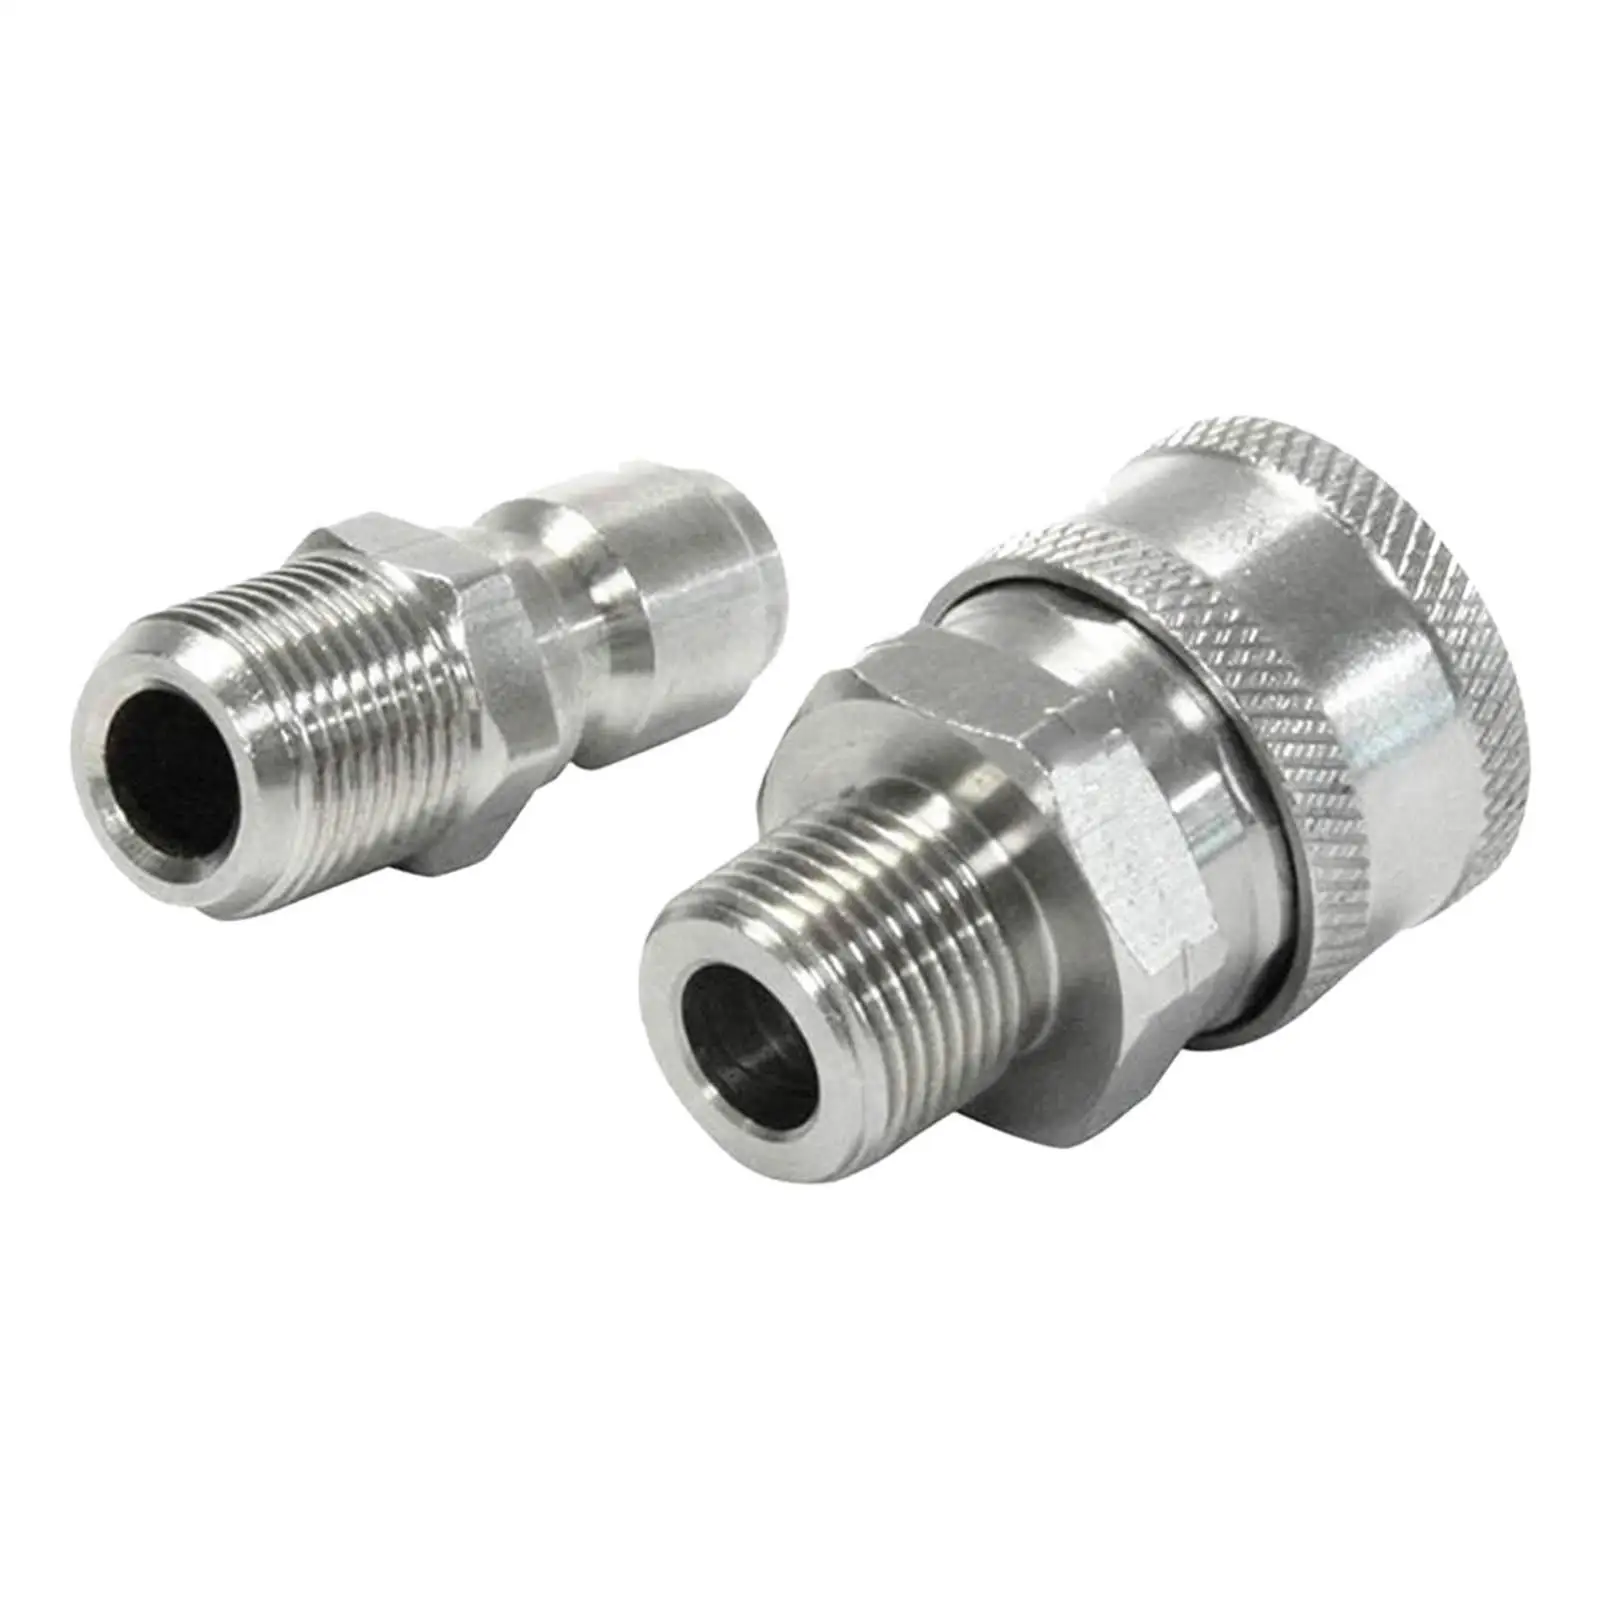 2 Pieces Pressure Washer Adapter Set 3/8 inch Water Pump Telescopic Rod Male Female Hose Not Easy to Leak Surface Cleaner